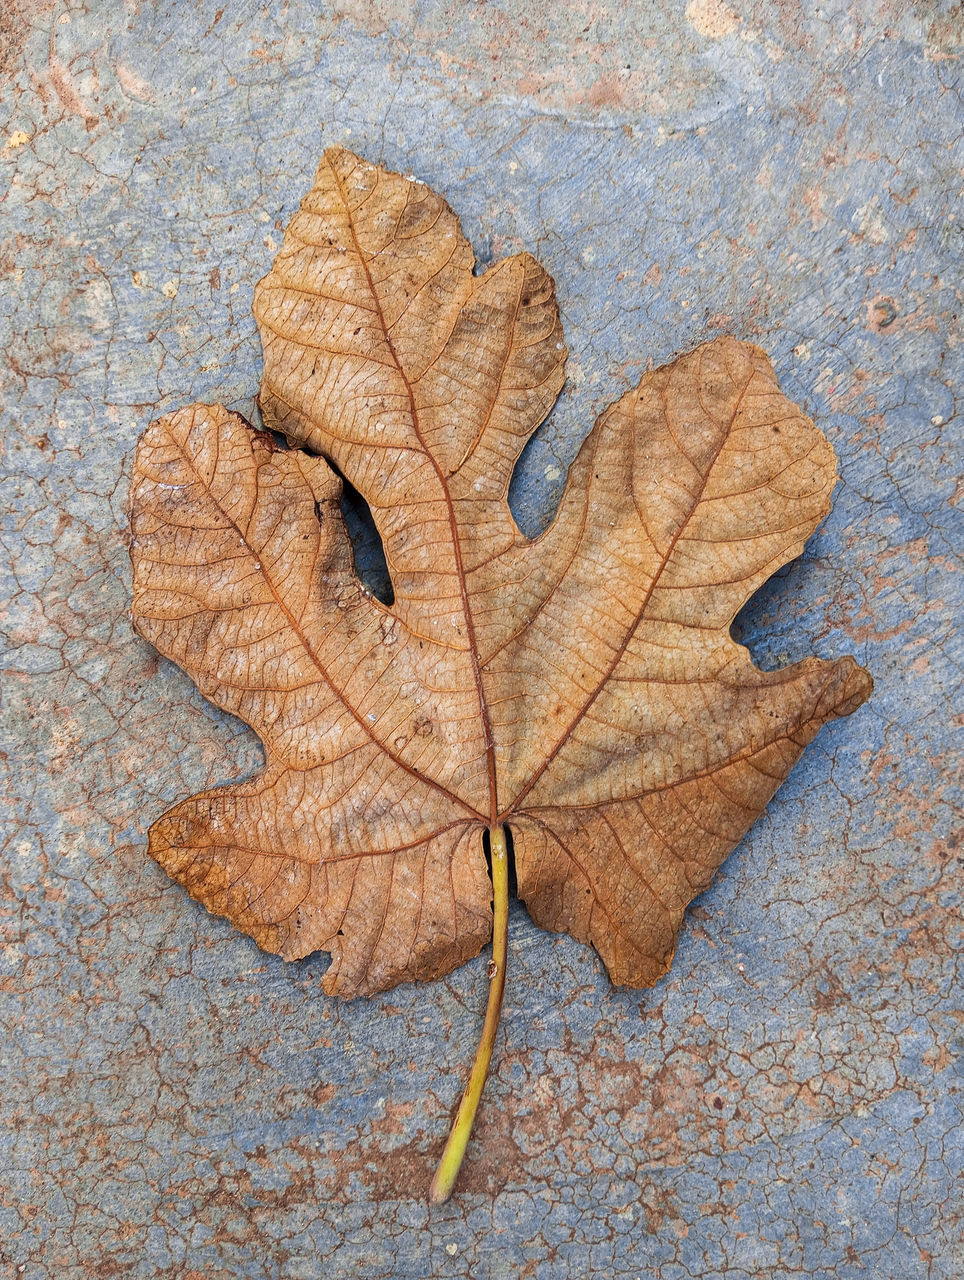 leaf, plant part, autumn, tree, leaf vein, maple leaf, dry, plant, no people, nature, high angle view, close-up, branch, directly above, day, brown, pattern, fragility, outdoors, textured, beauty in nature, falling, leaves